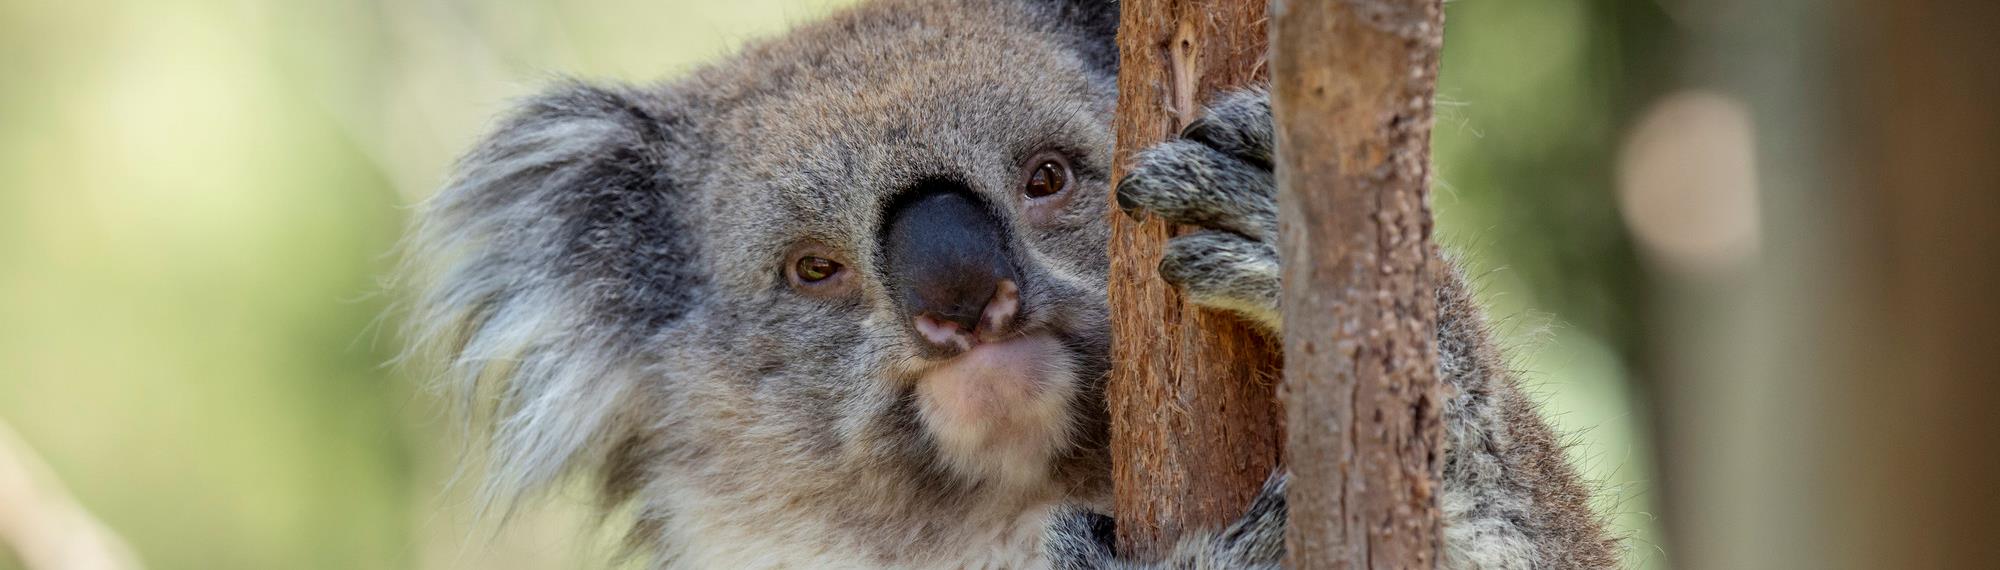 Koala looking at the camera from behind a tree branch while climbing. View of koalas upper half.